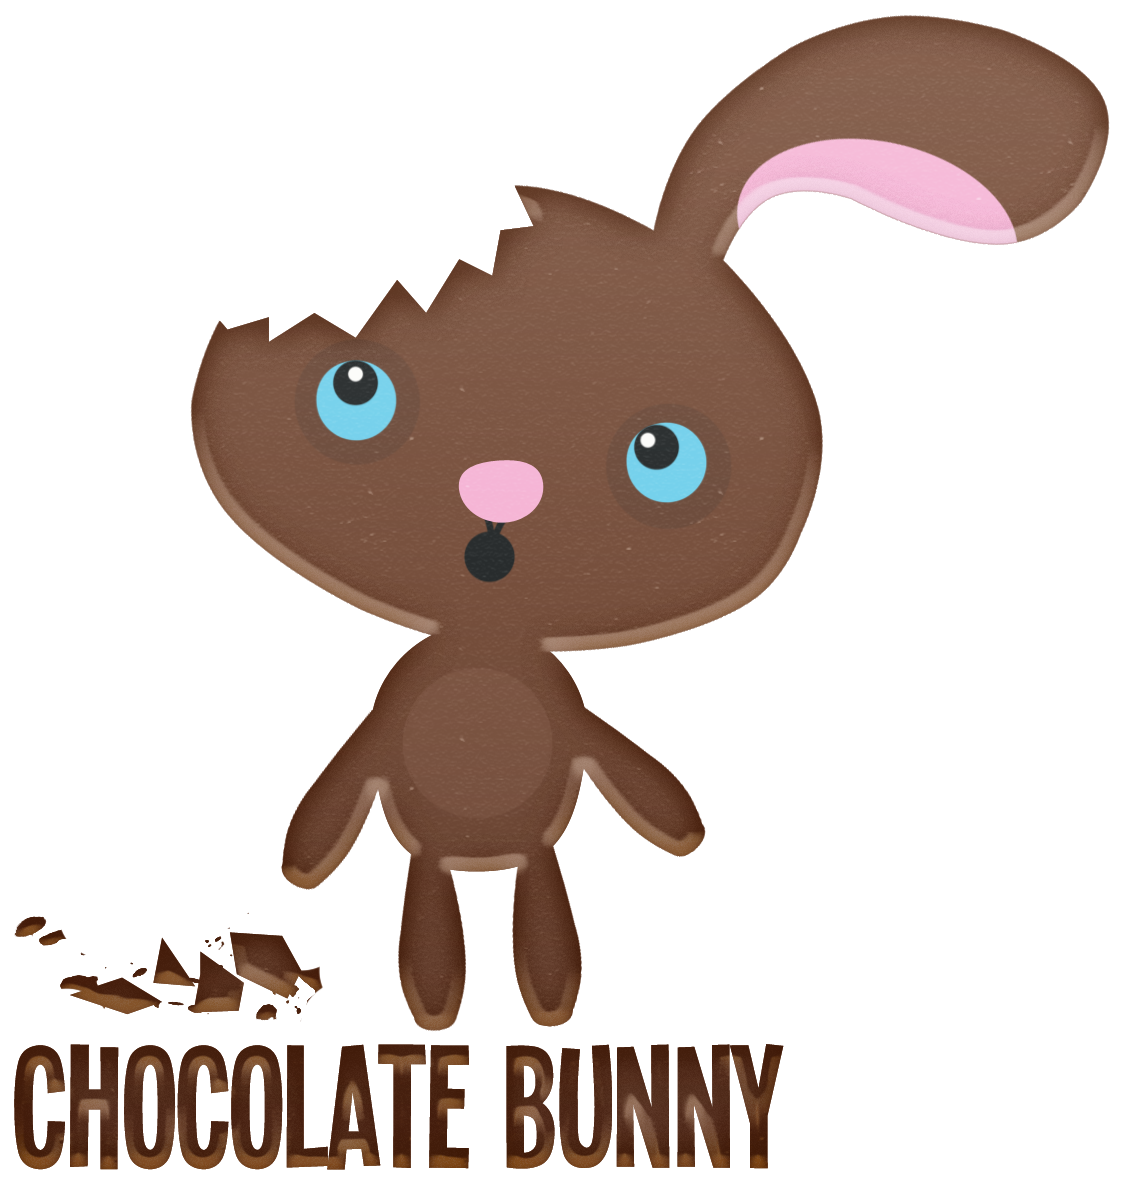 Cute Chocolate Bunny Illustration PNG